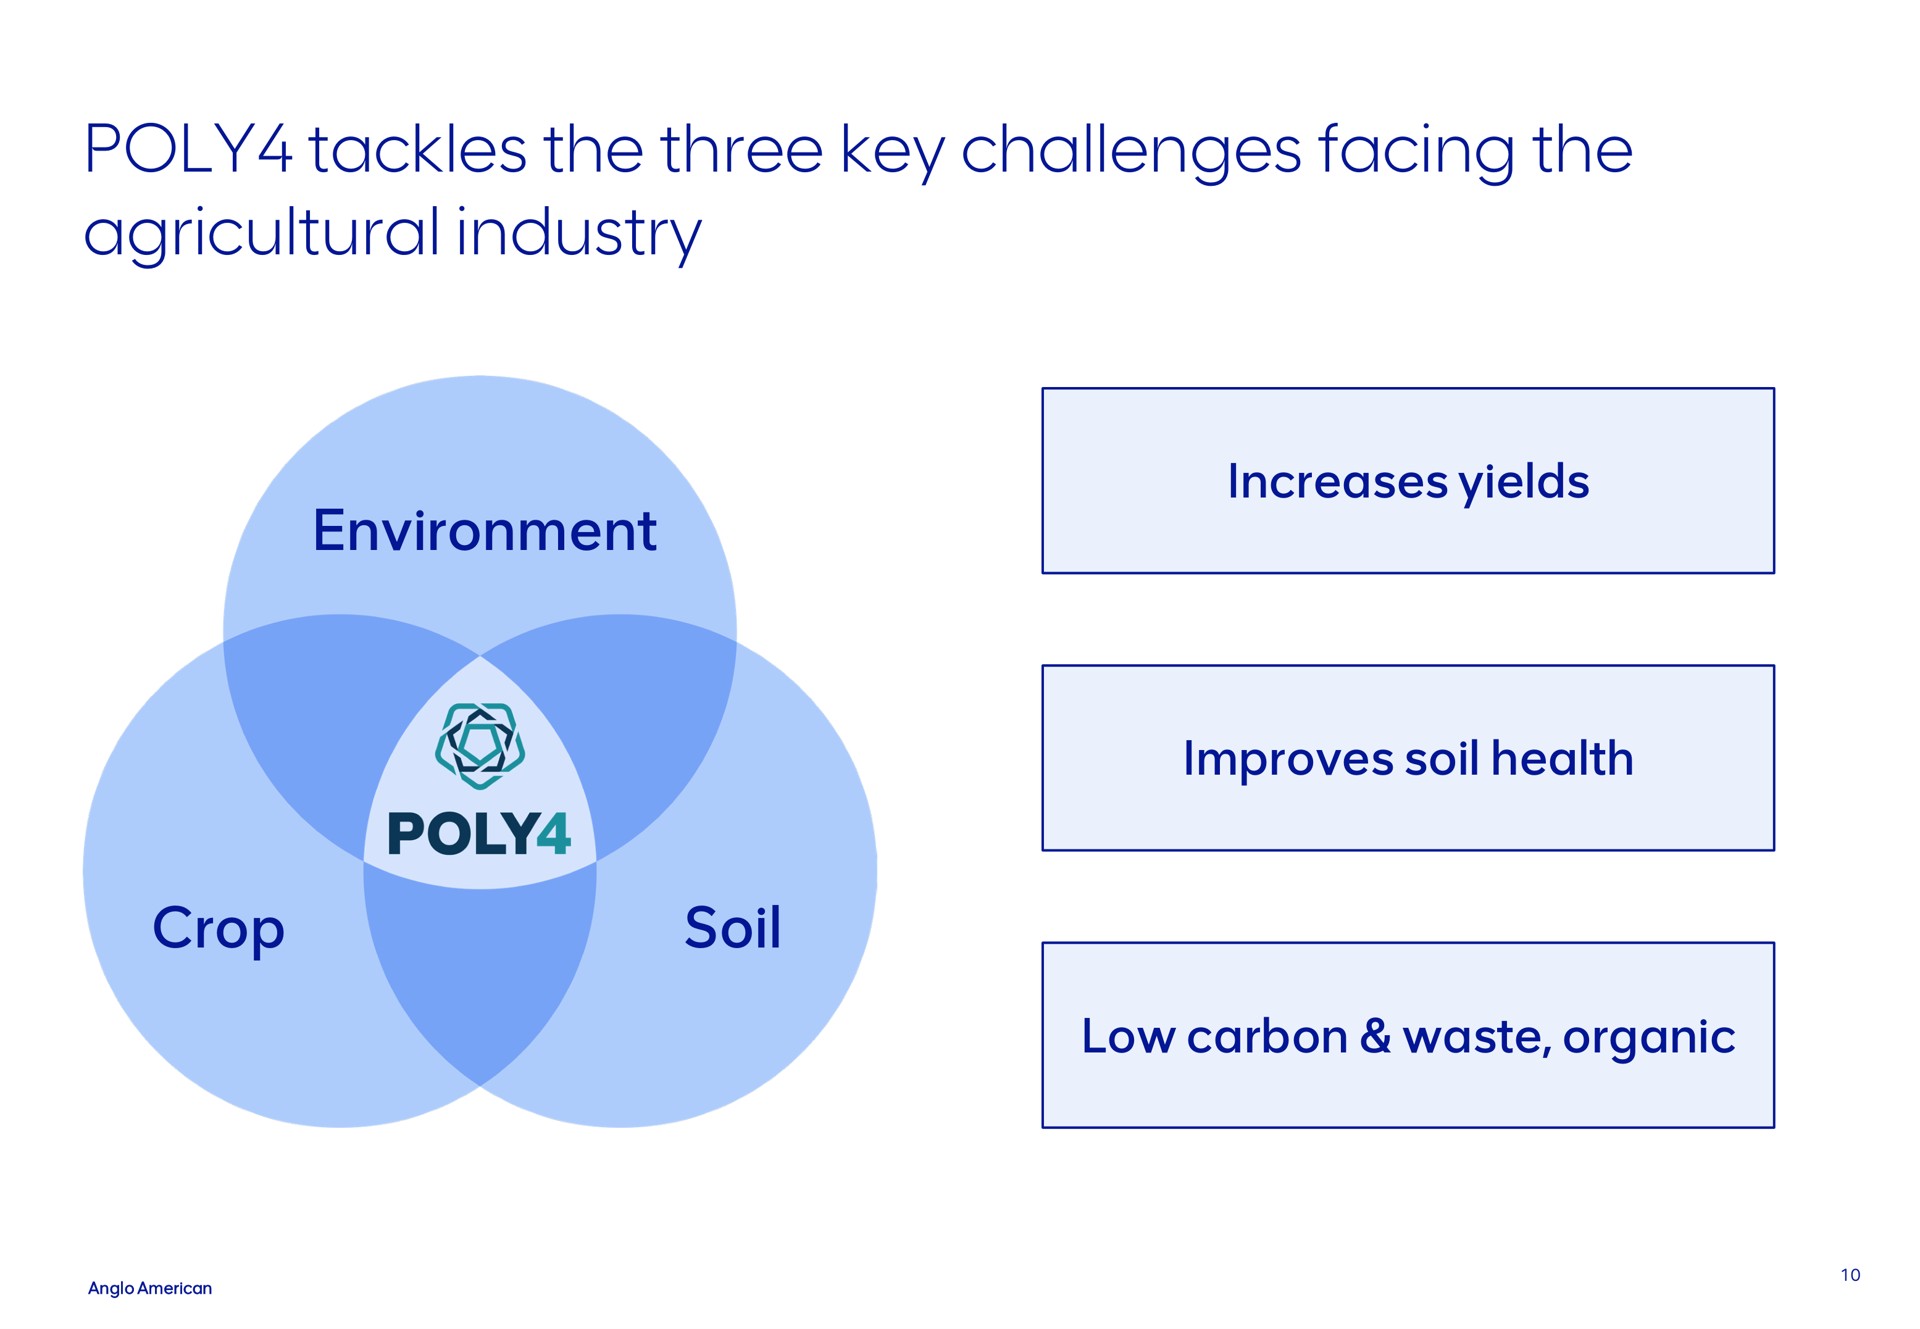 poly tackles the three key challenges facing the agricultural industry | AngloAmerican